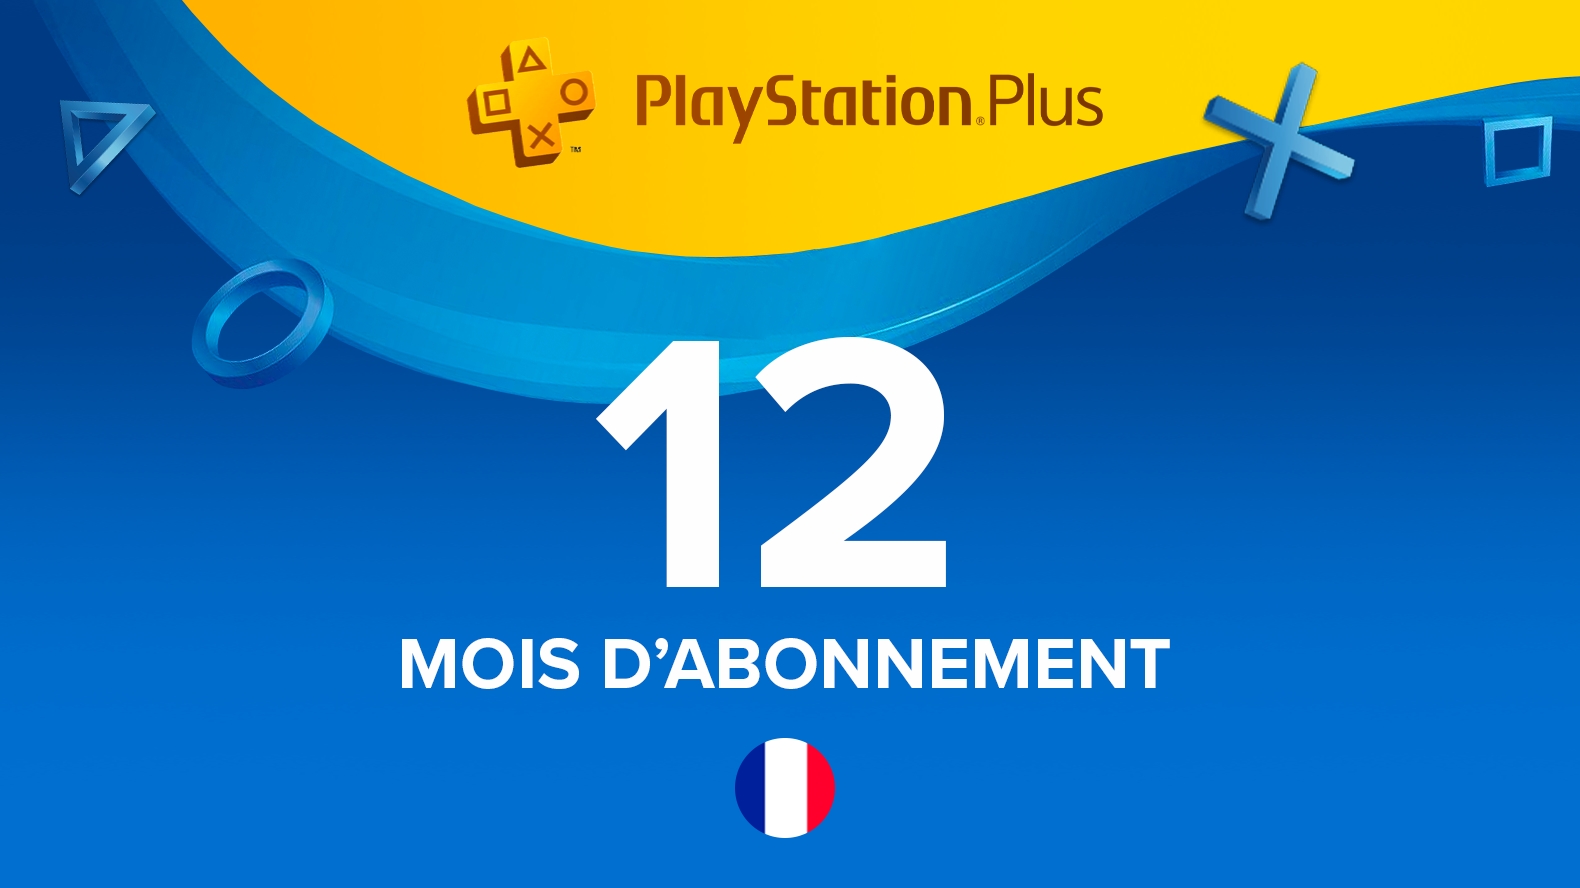 https://gaming-cdn.com/images/products/604/orig/playstation-plus-abonnement-365-jours-12-months-playstation-3-playstation-4-playstation-5-jeu-playstation-store-france-cover.jpg?v=1666106035